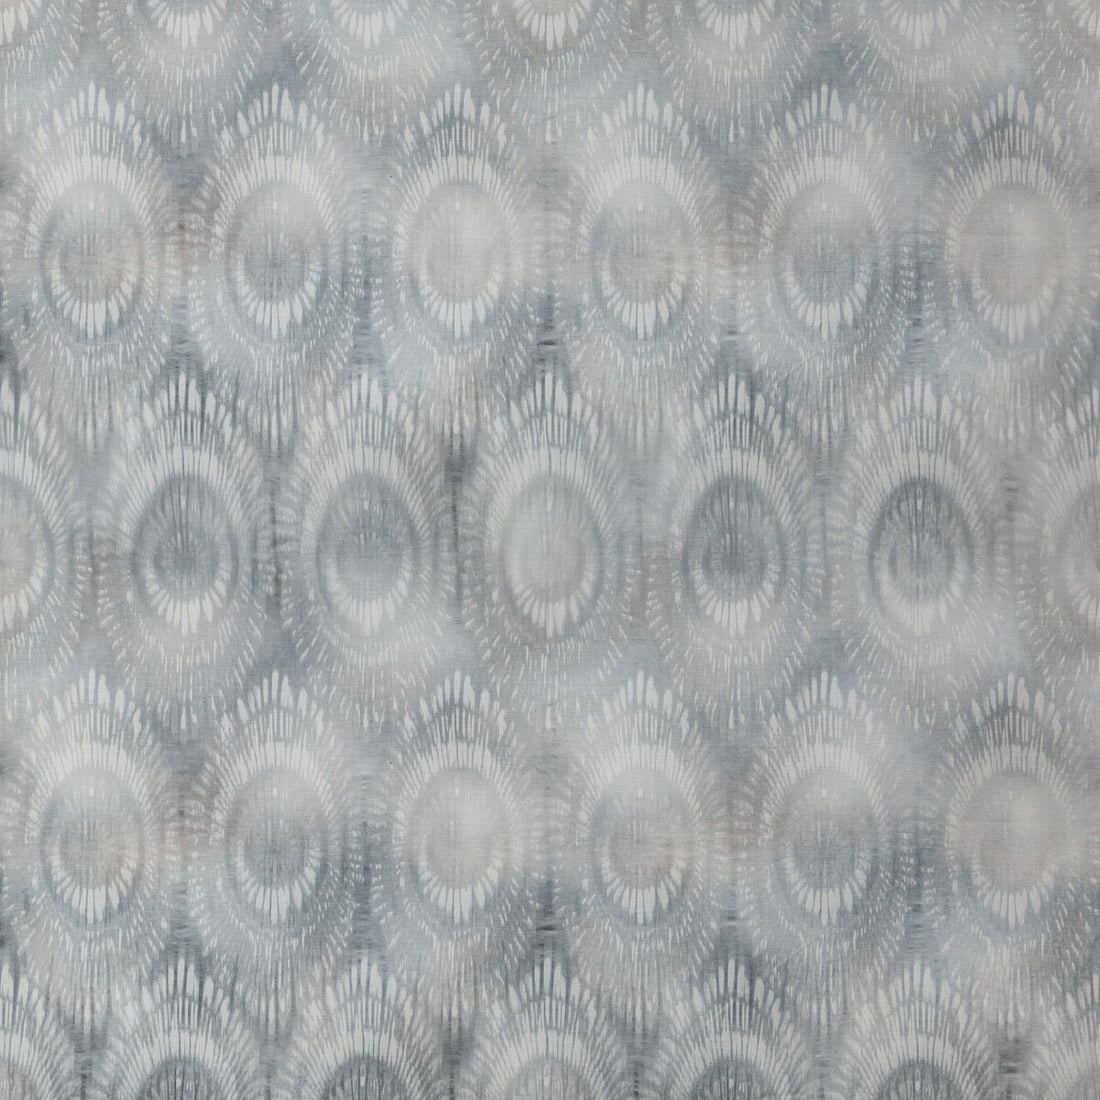 Delta Nile fabric in vapor color - pattern DELTA NILE.21.0 - by Kravet Couture in the Windsor Smith Naila collection